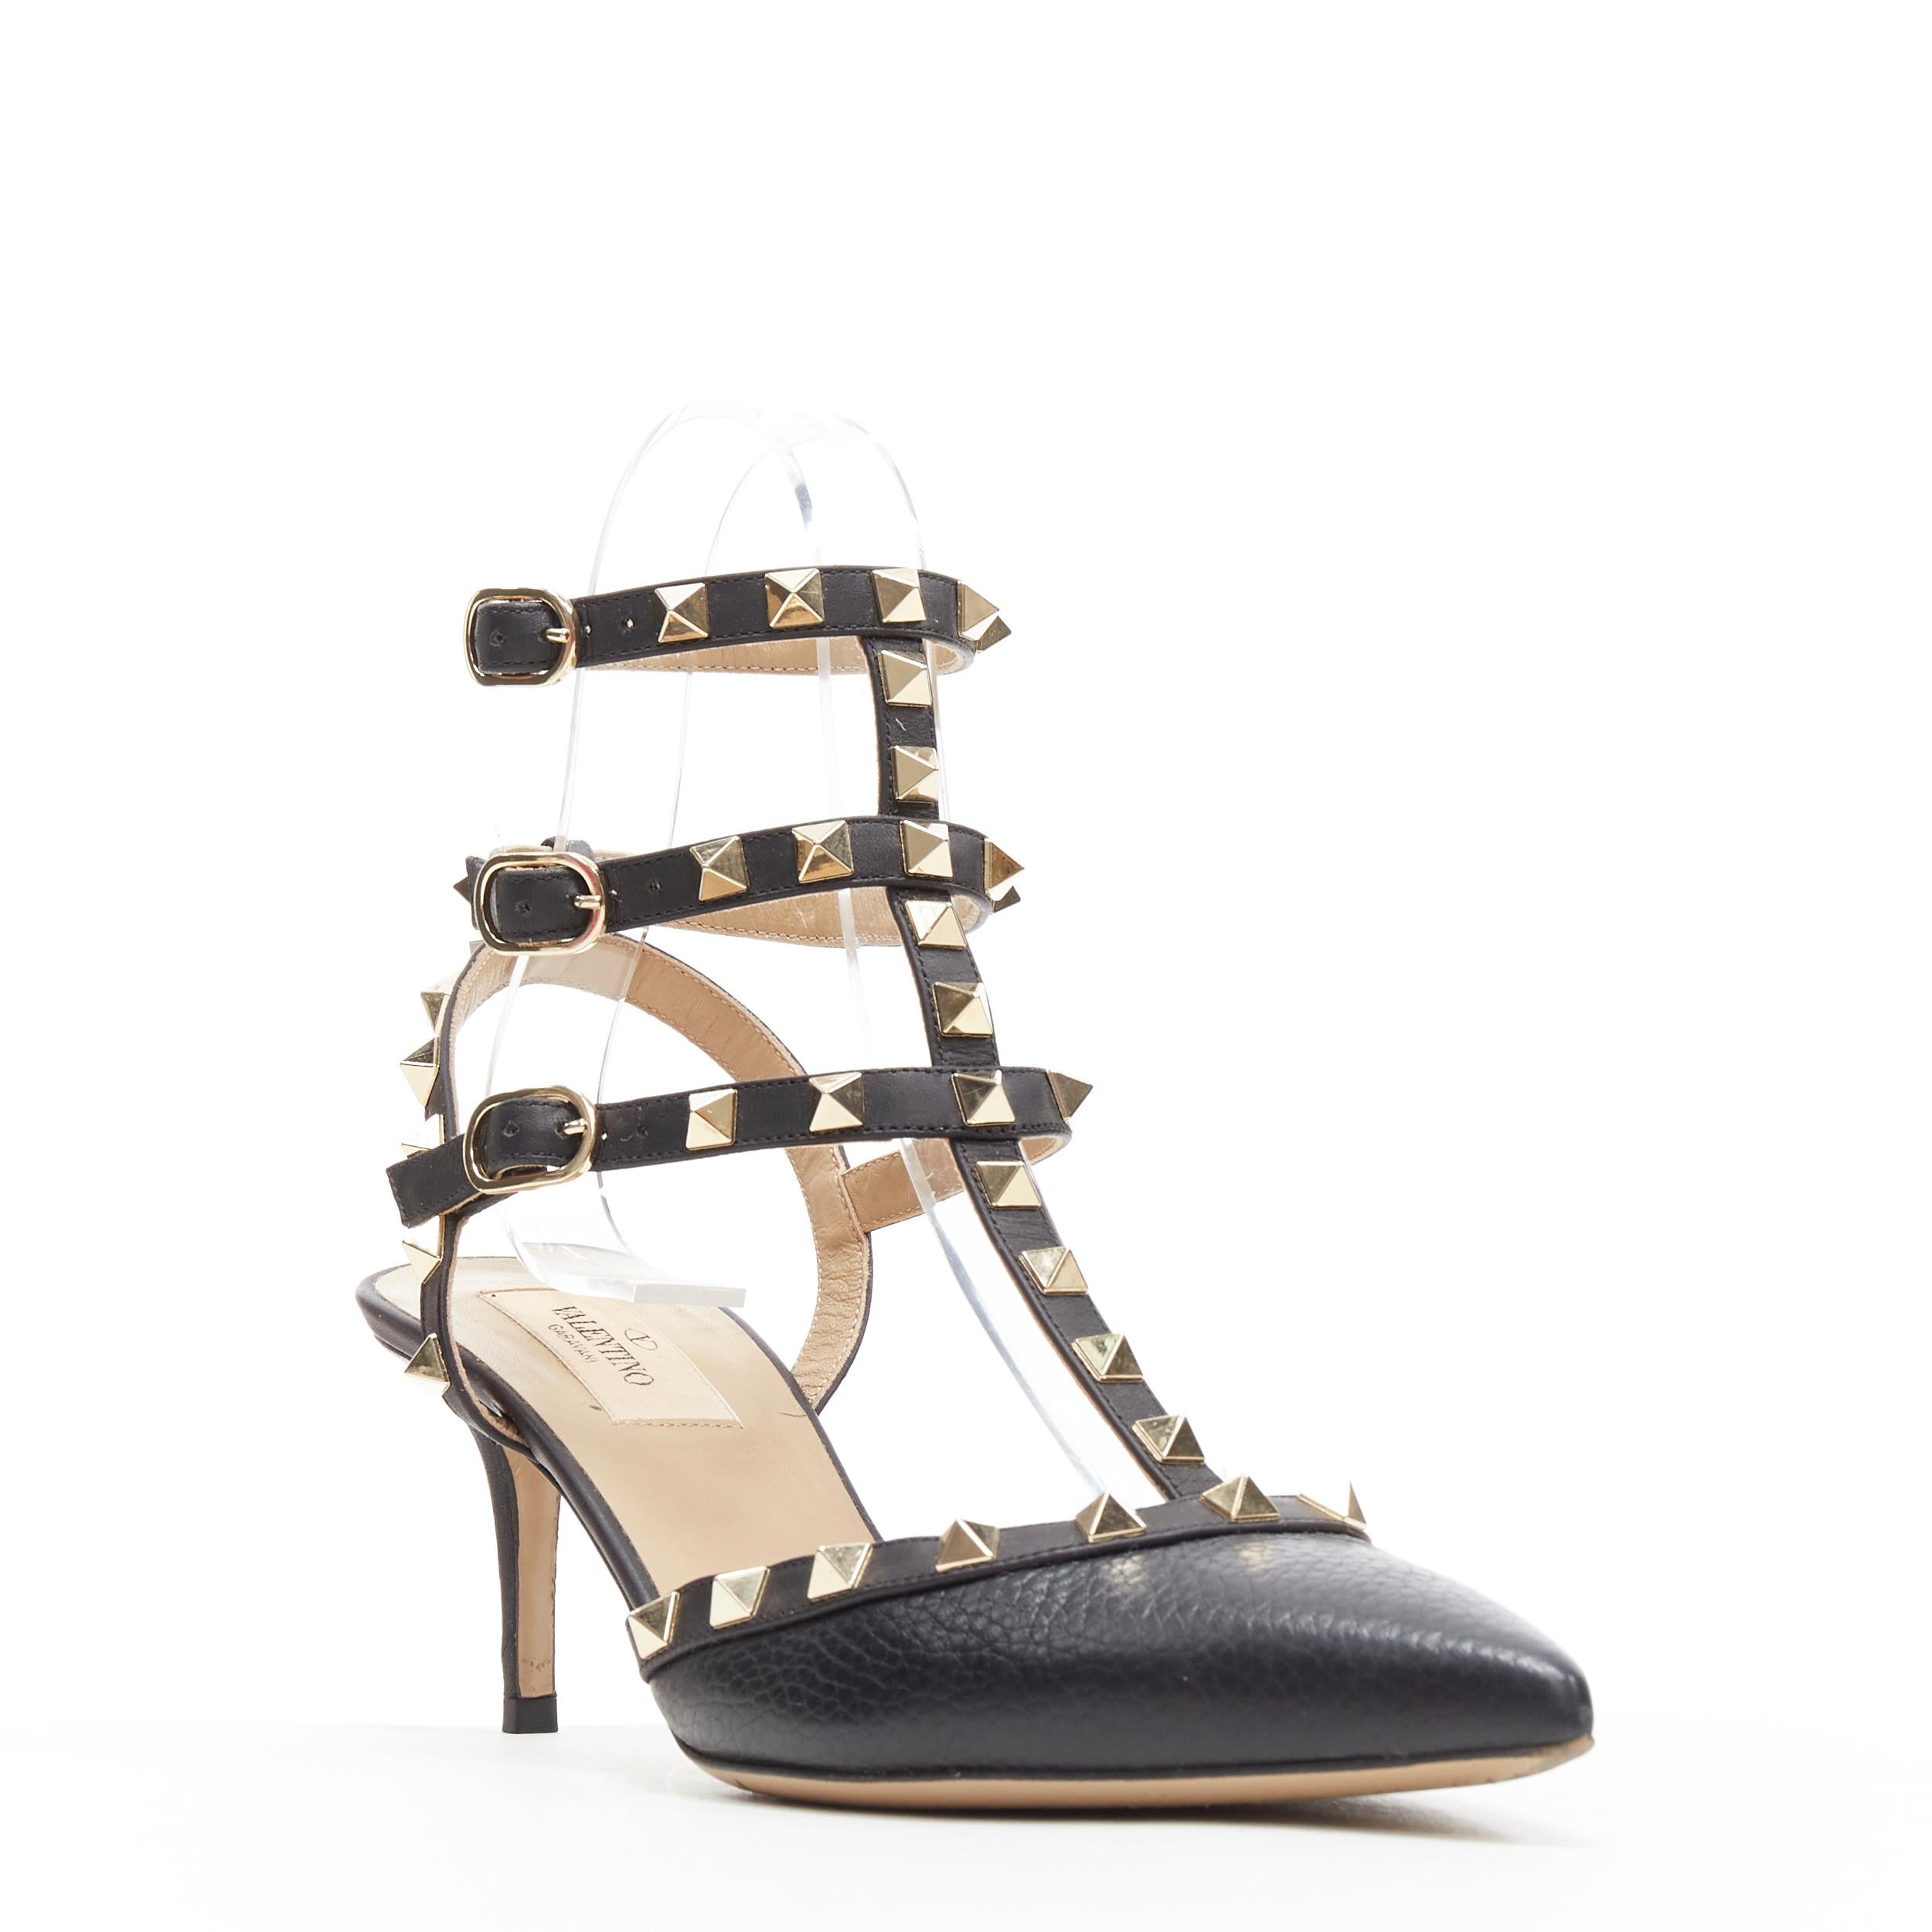 VALENTINO Rockstud black pebble leather gold spike stud caged pump EU38.5
Brand: Valentino
Model Name / Style: Rockstud
Material: Leather
Color: Black
Pattern: Solid
Closure: Buckle
Extra Detail: High (3-3.9 in) heel height. Pointed toe. Slim